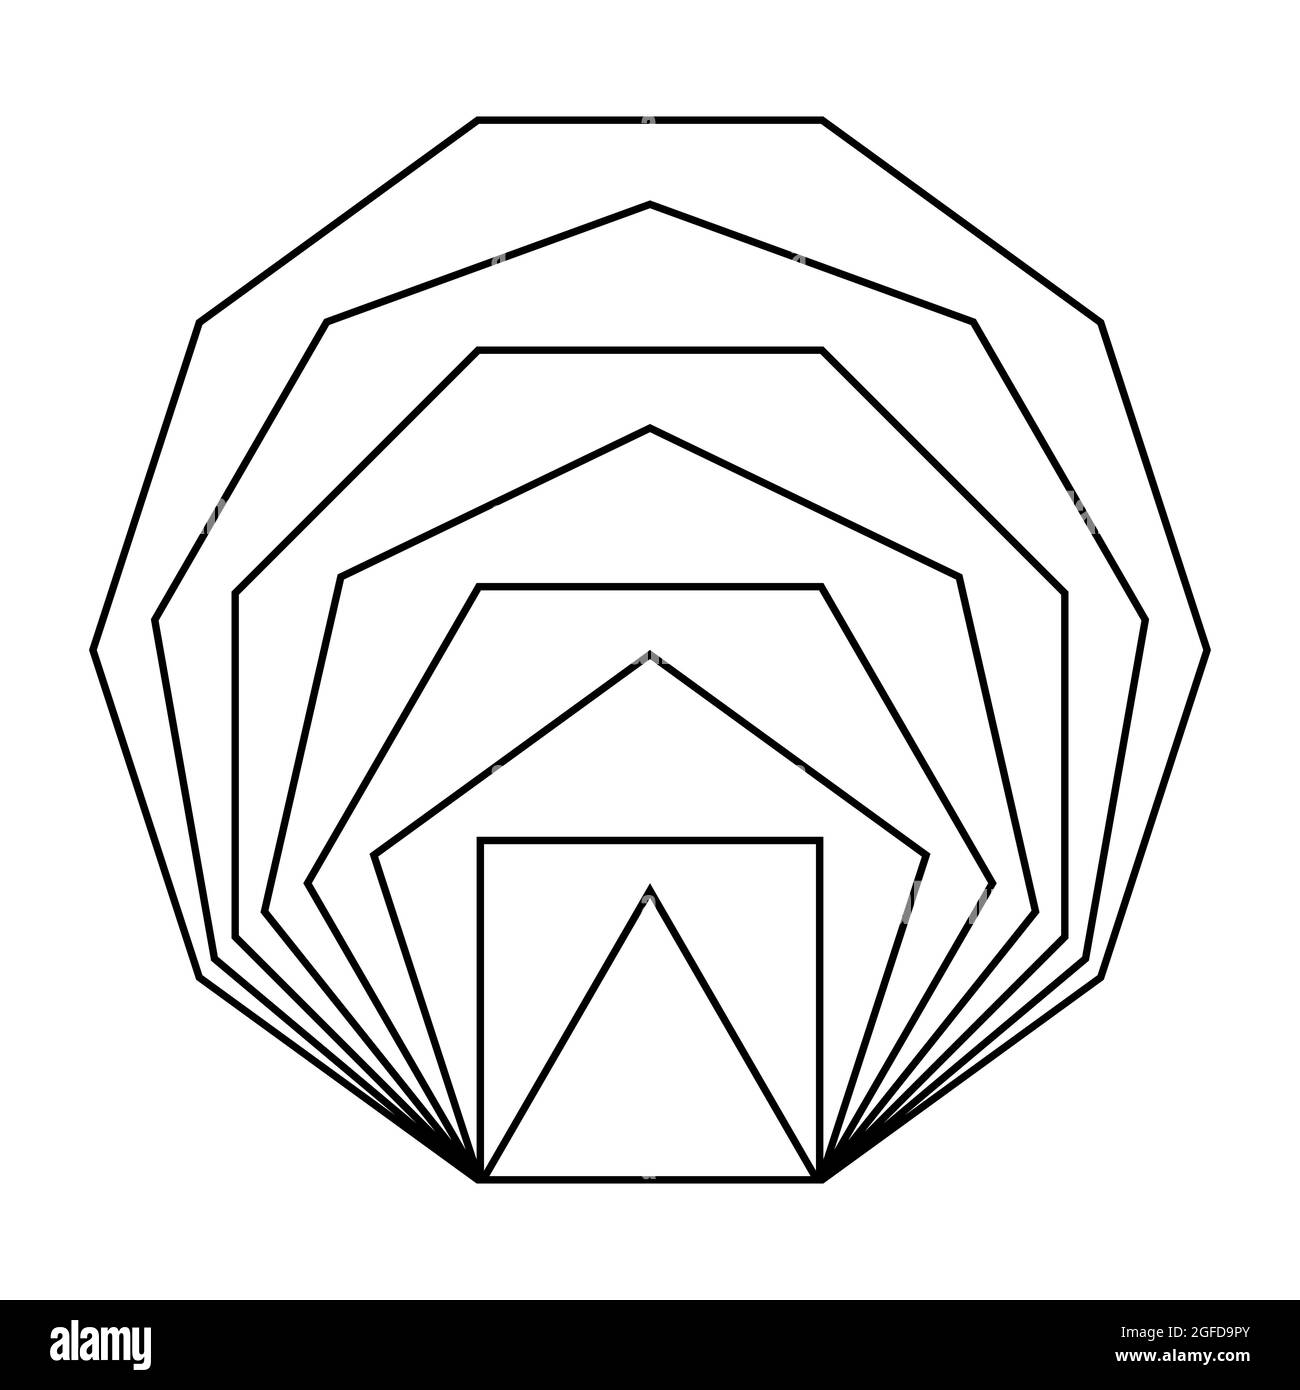 Regular polygons, with the same line segment length, in a row. Convex, equiangular and equilateral polygons, from a triangle to a decagon. Stock Photo